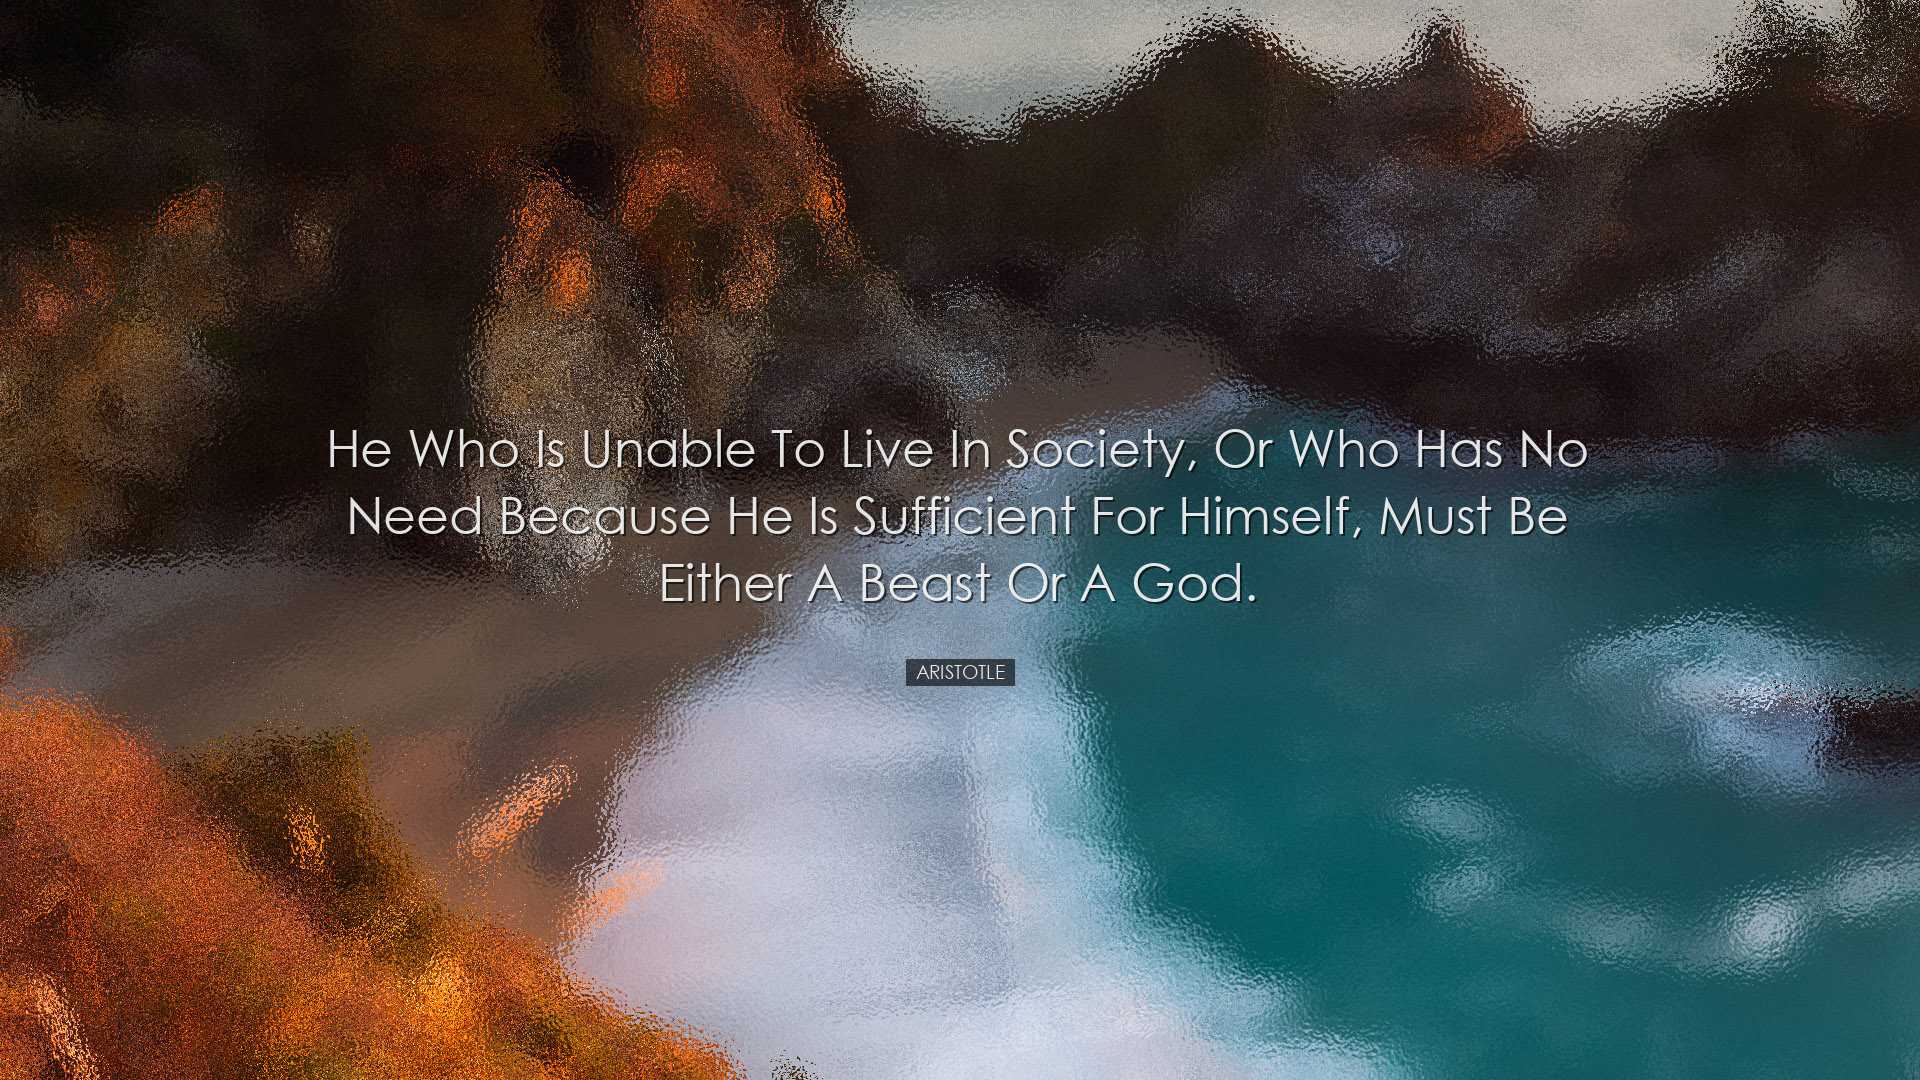 He who is unable to live in society, or who has no need because he